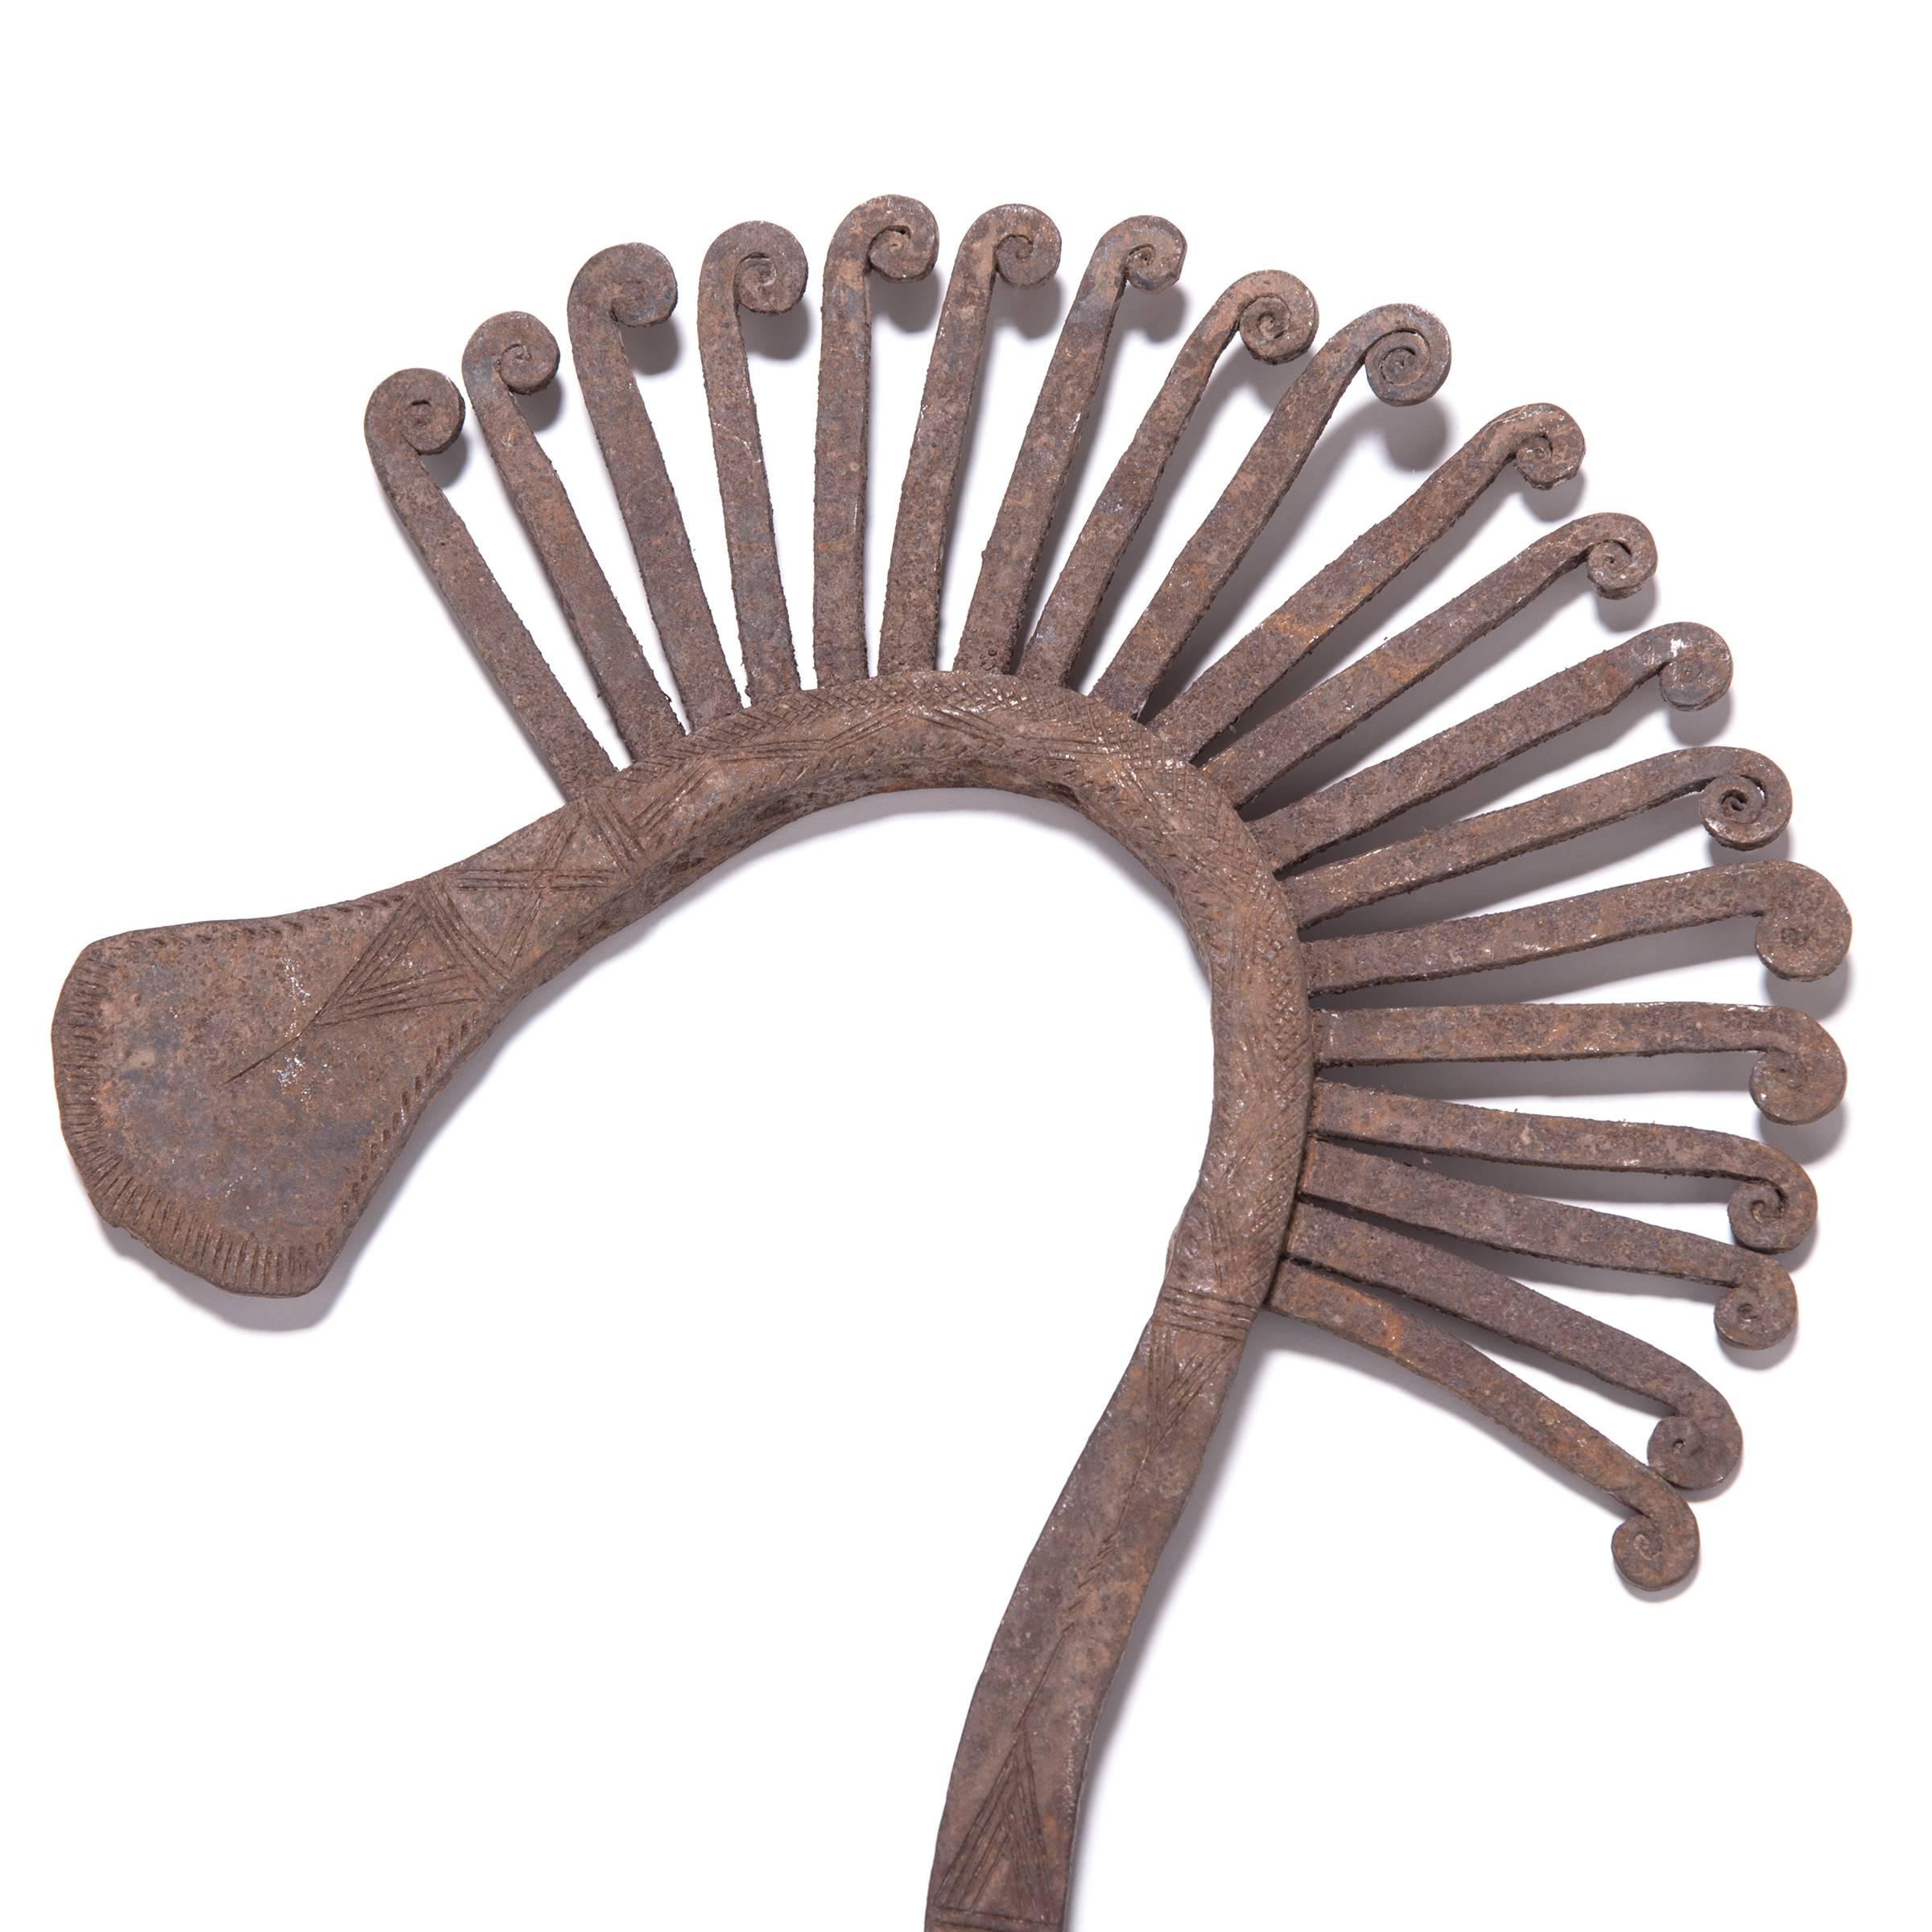 For hundreds of years before colonization, African tribes elevated everyday objects to create multi-use currency. The exotic bird's head design of this iron staff currency calls to mind flocks common to the northwestern reaches of Cameroon. Valued